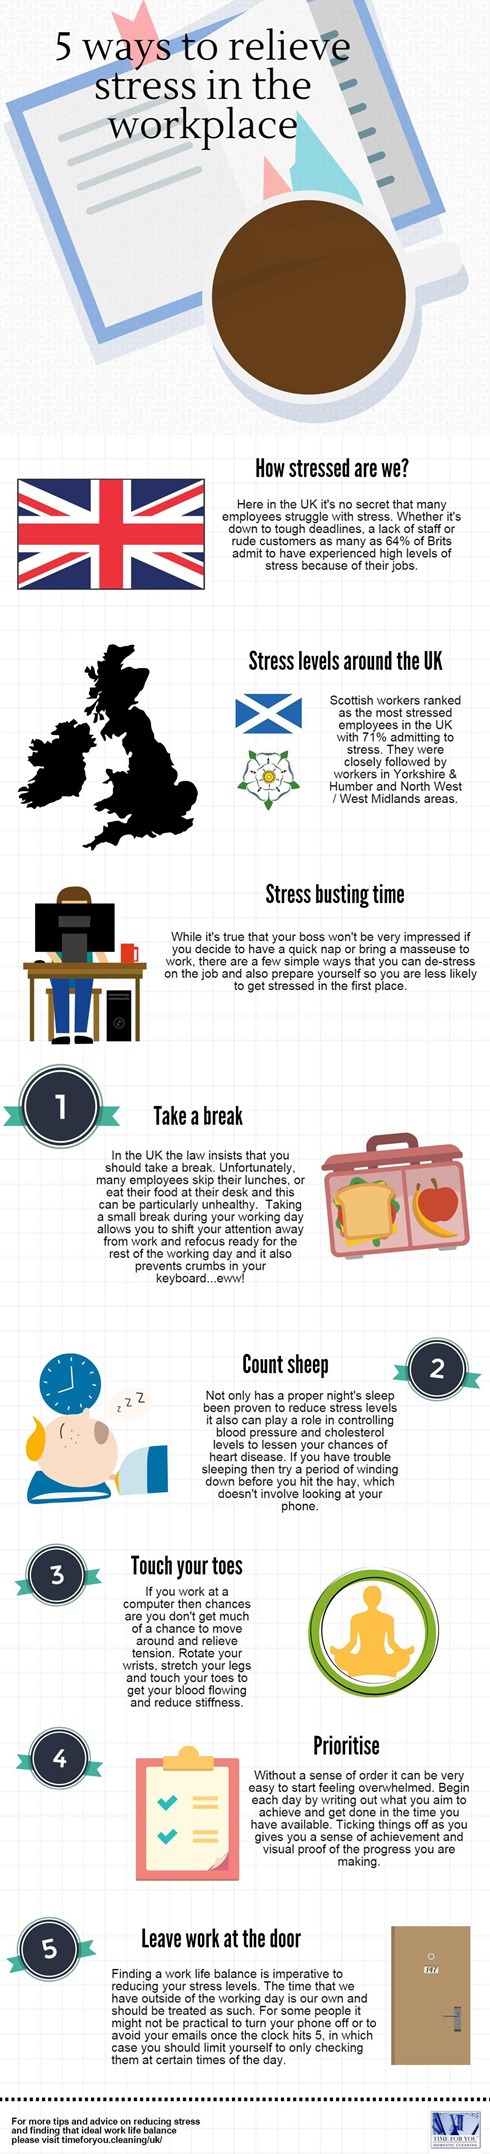 5 ways to relieve stress in the workplace